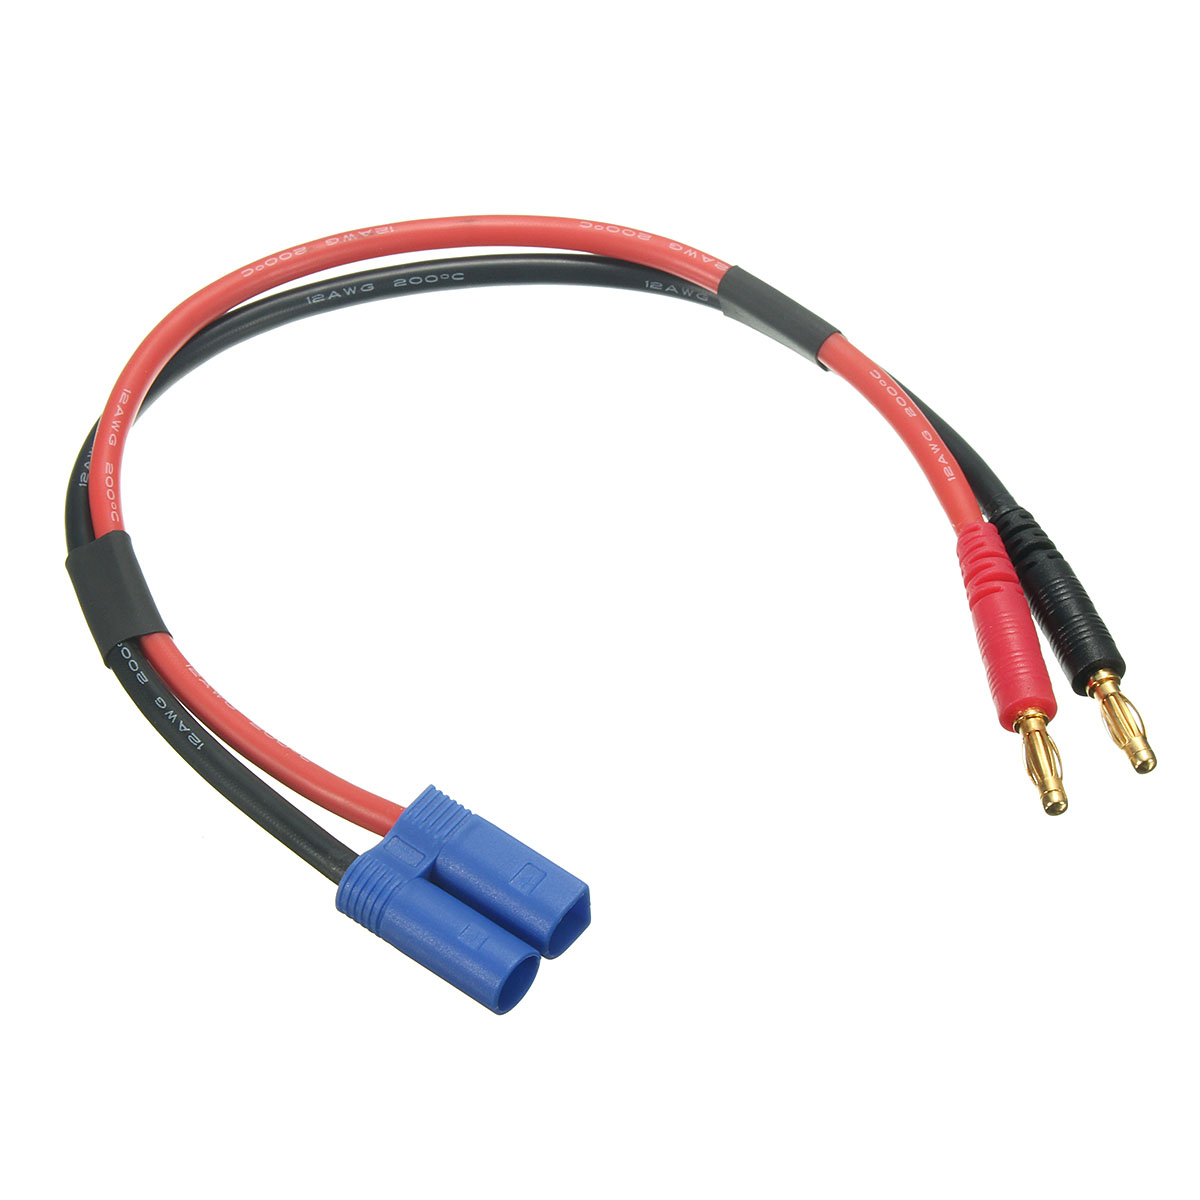 4mm-Banana-EC5-Plug-Charging-Cable-Lithium-Battery-Charging-Wire-1144660-4